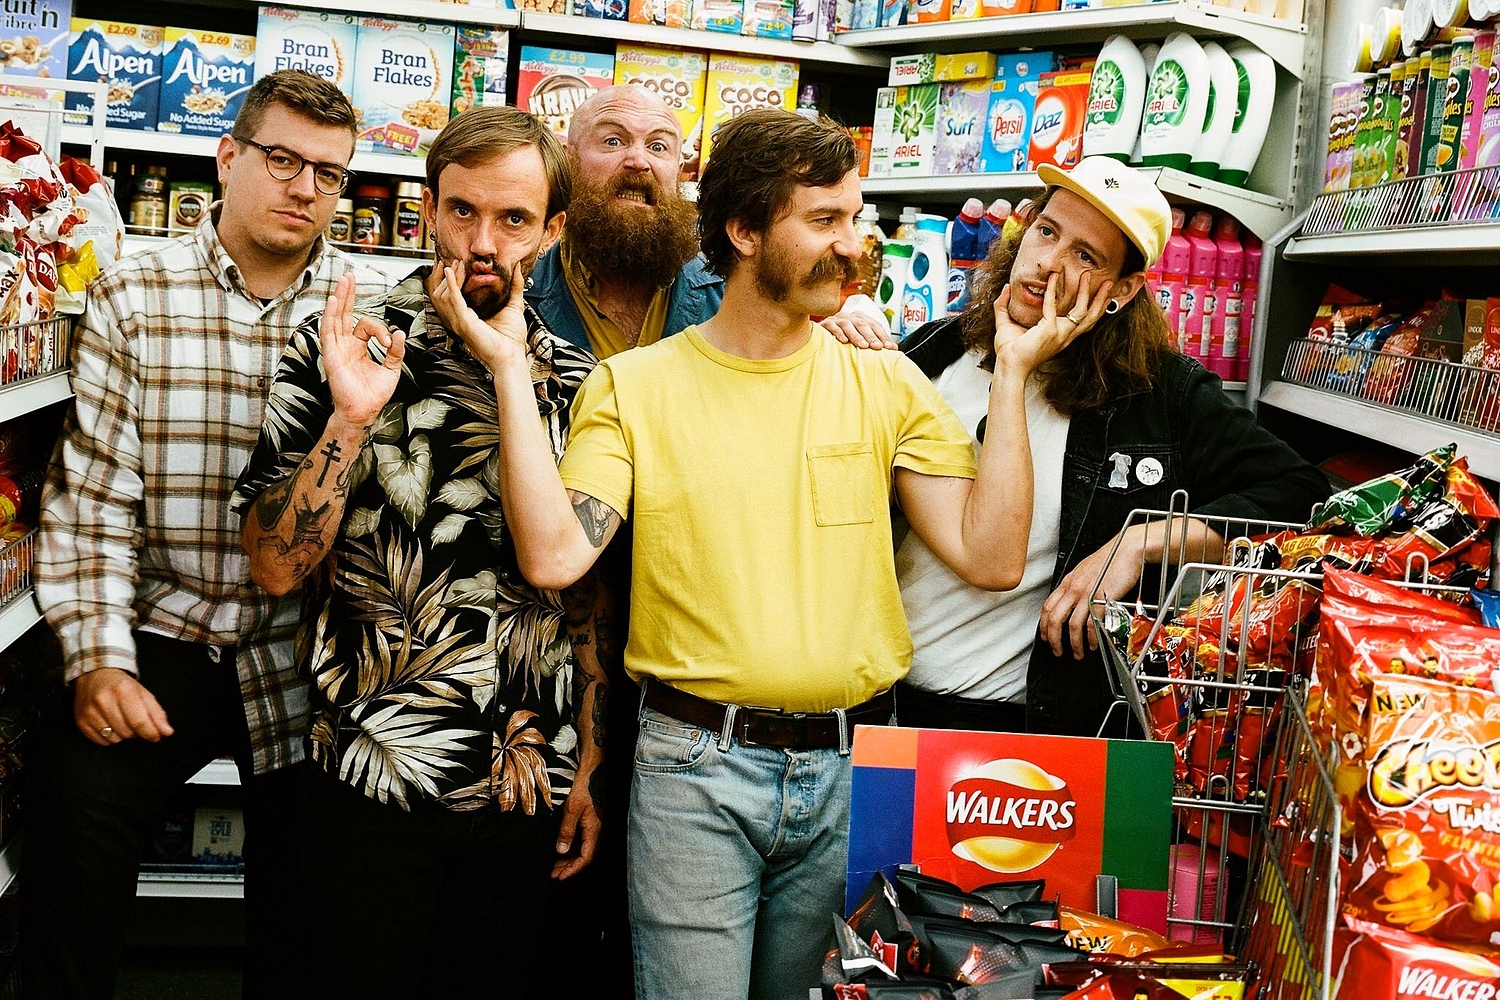 IDLES fulfil a lifelong dream and cement their status as stars at Glastonbury 2019